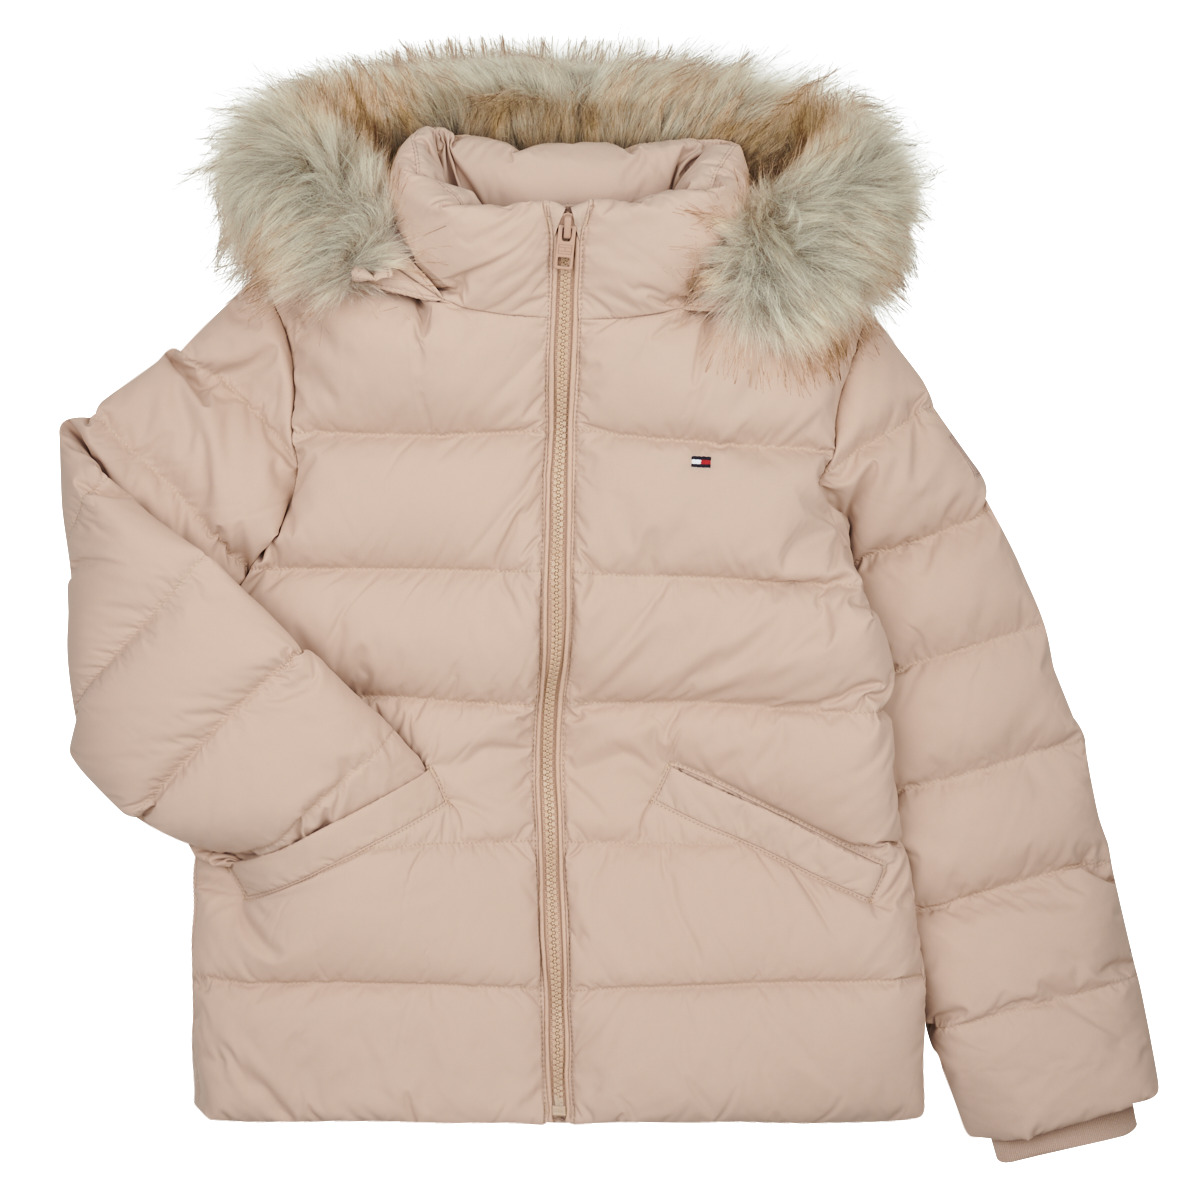 Tommy Hilfiger ESSENTIAL Clothing - Child delivery Spartoo Free DOWN FUR NET Duffel | - JACKET HOOD Beige ! coats